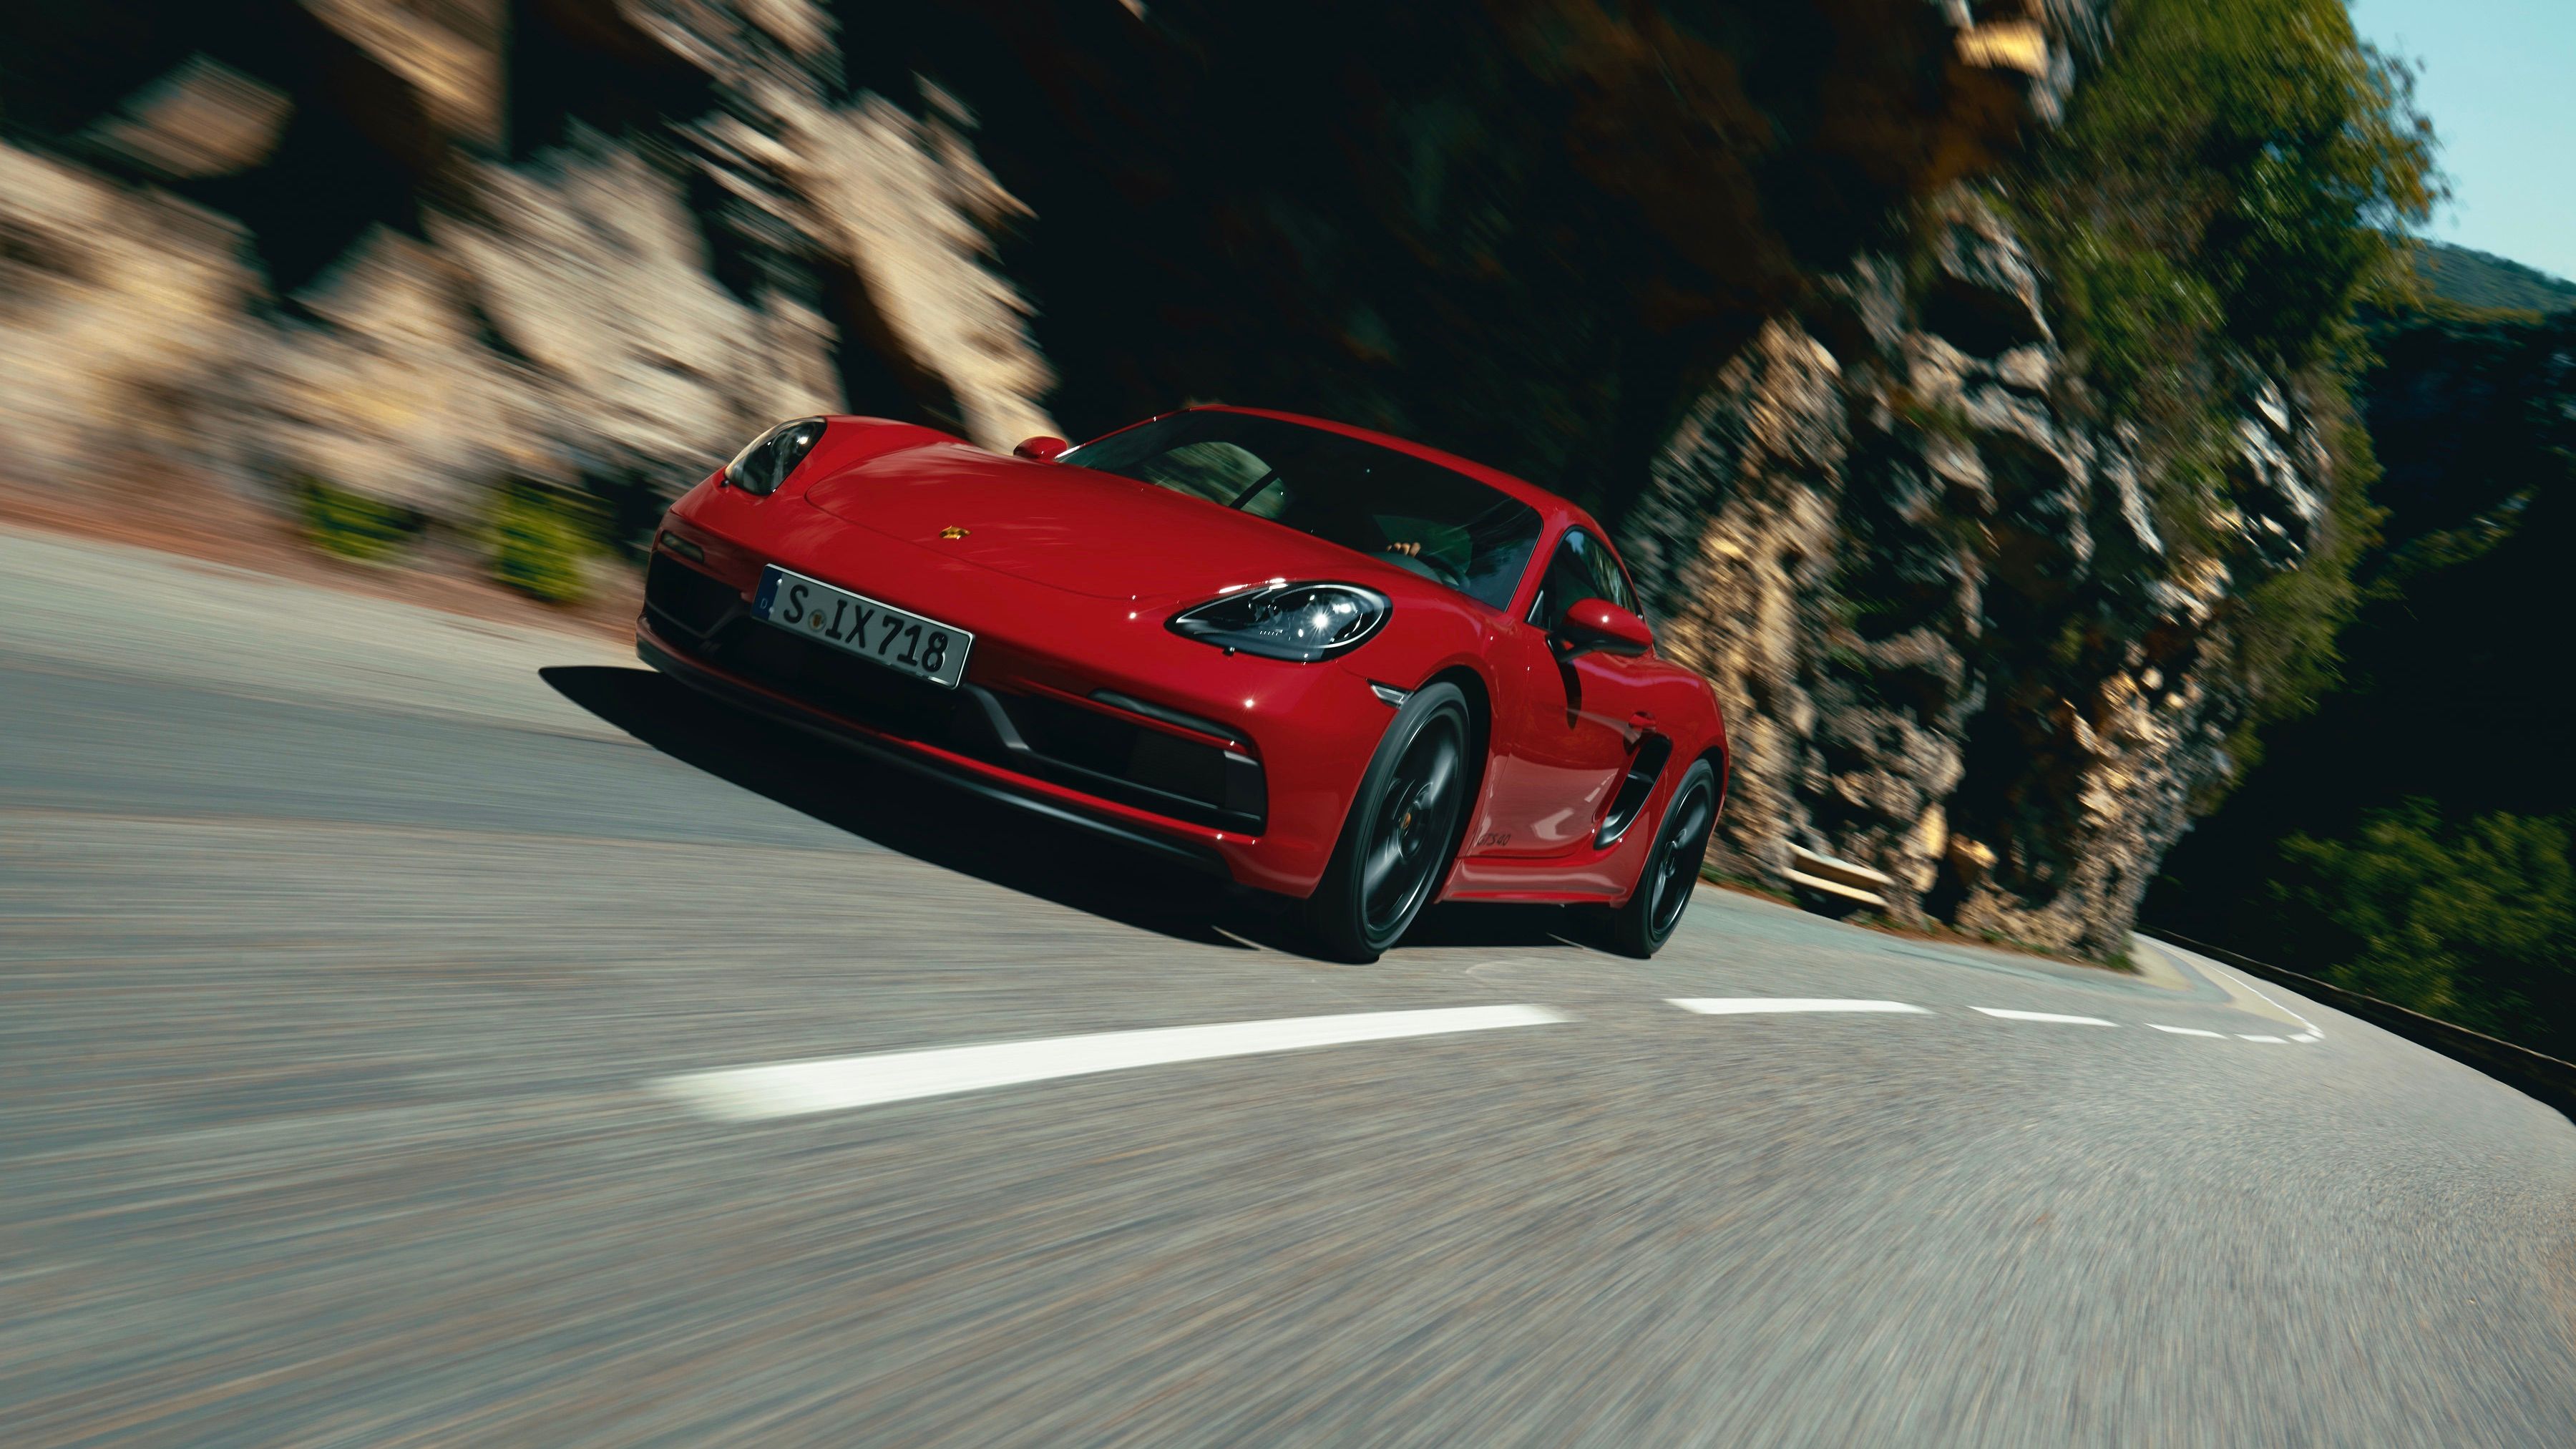 2020 The New Porsche 718 Boxster and Cayman GTS 4.0 Are Here to Please Purists